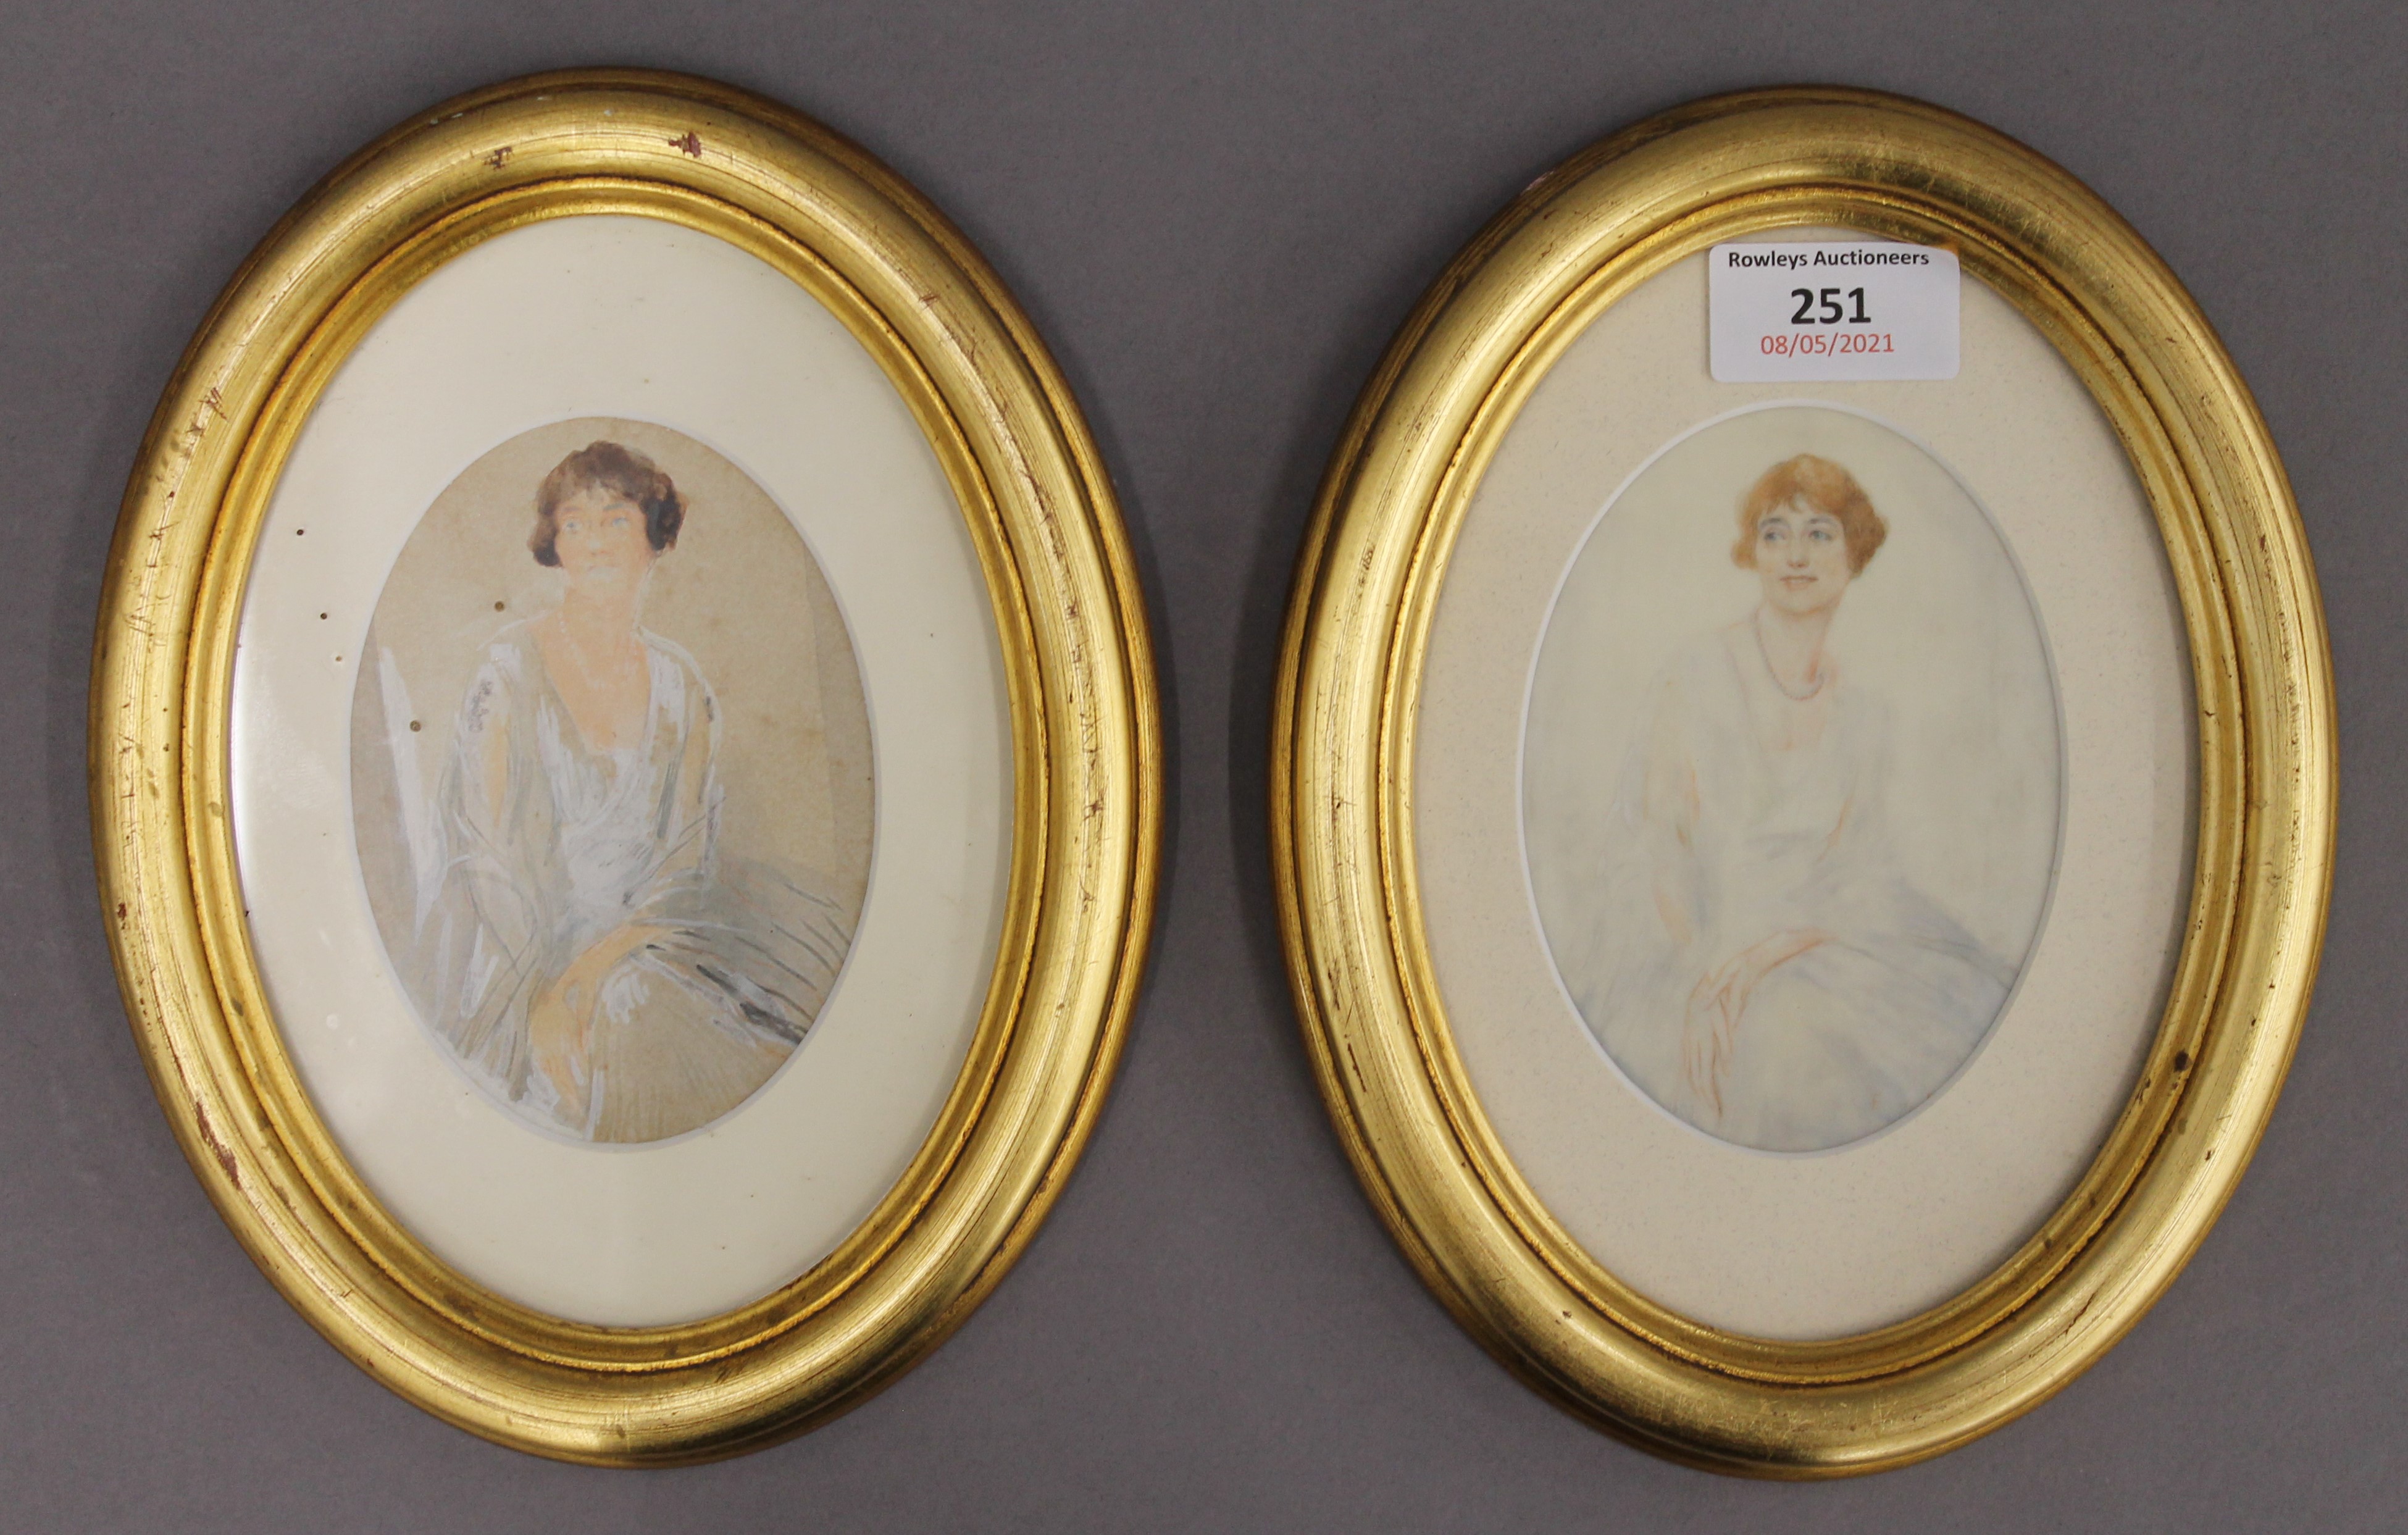 E VON HUTTENBRENNER, two early 20th century Portraits of a Lady, watercolours, one on paper,